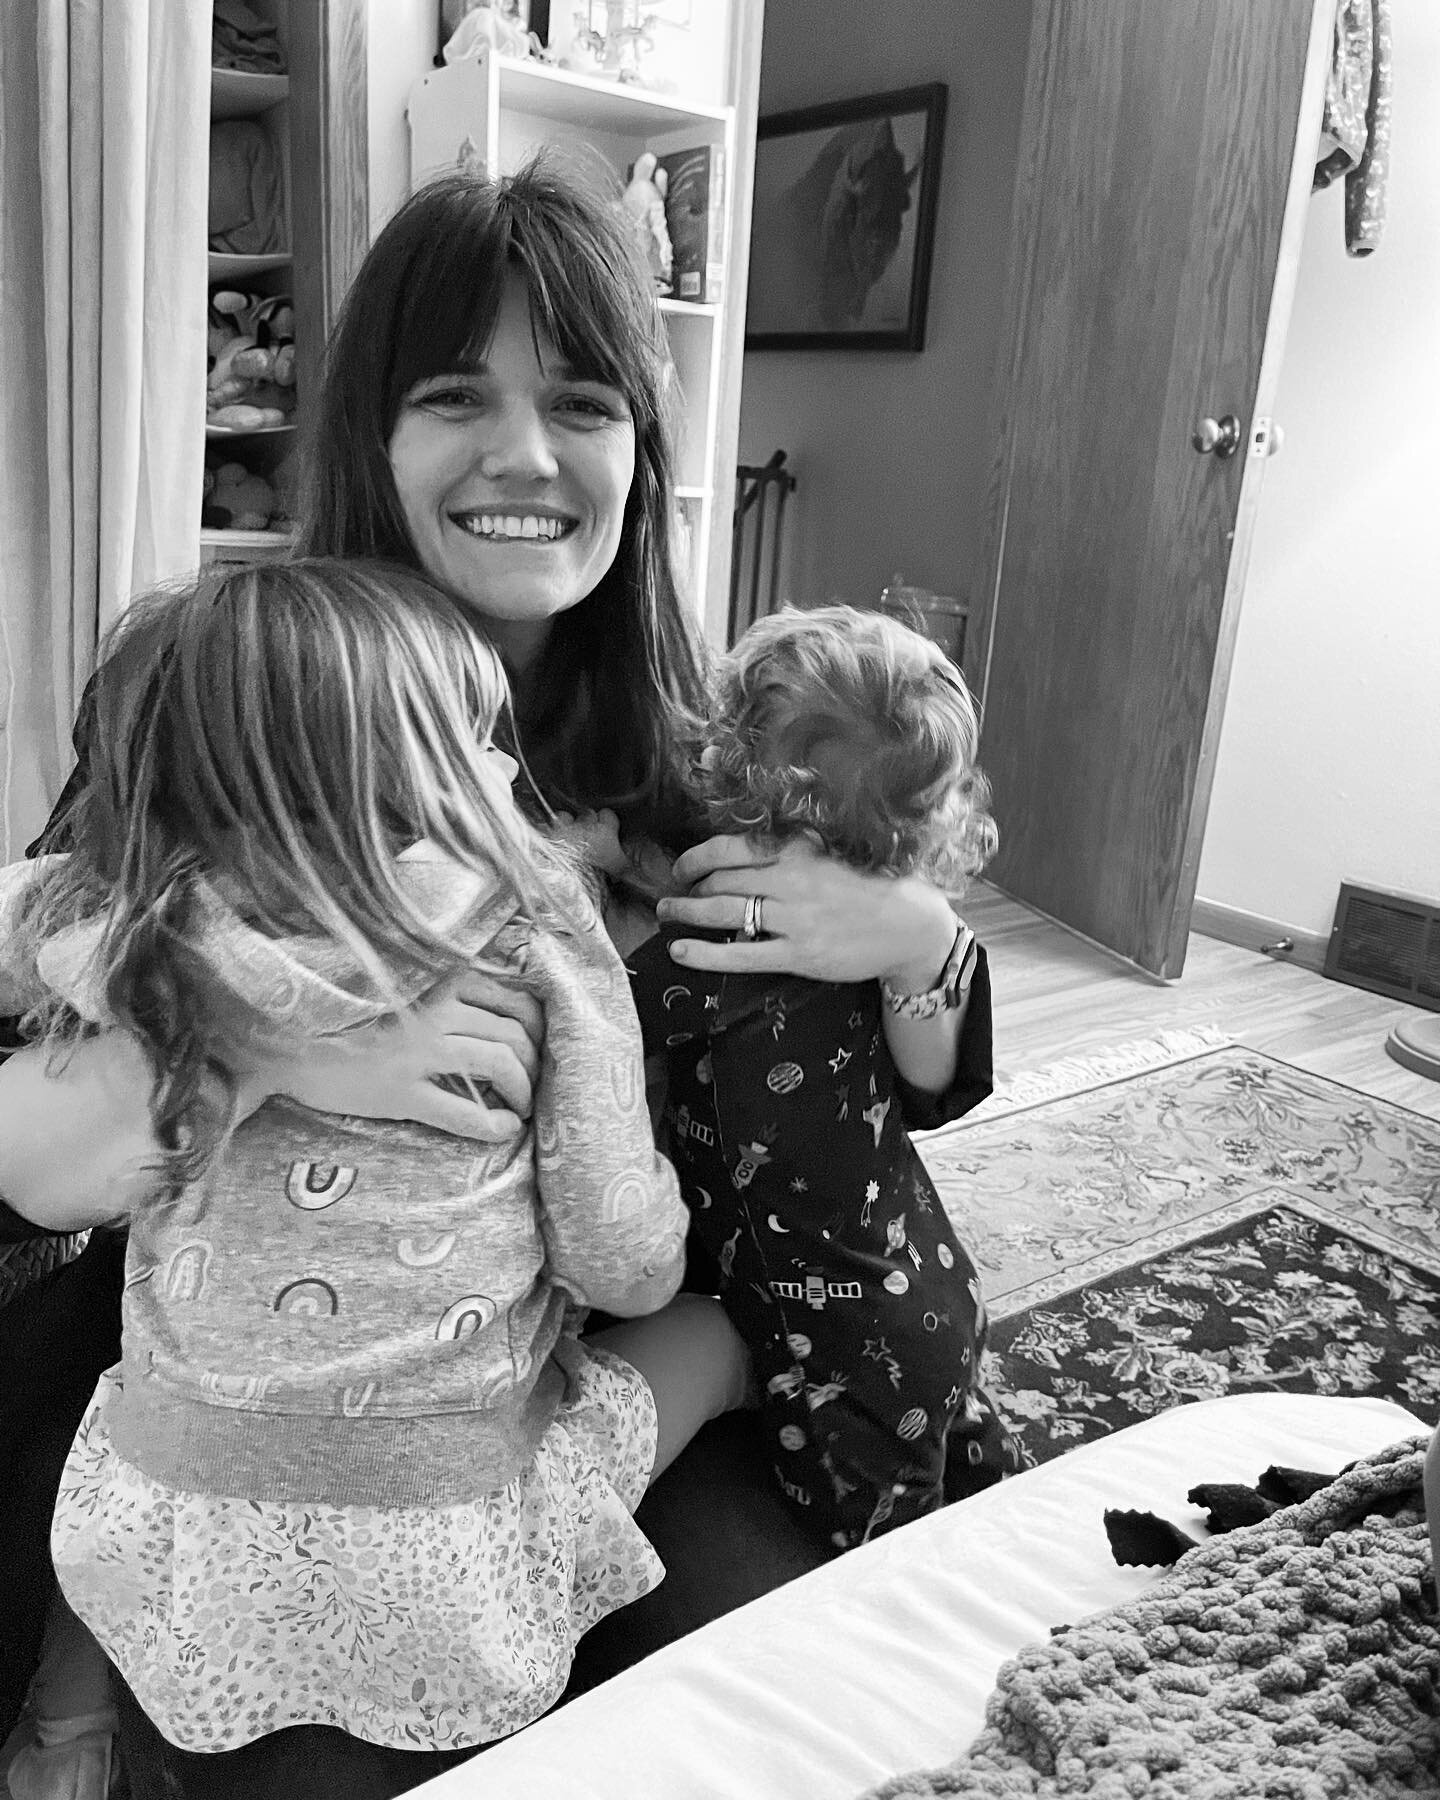 My heart, soul and forever Valentine snuggled up with our precious little angels. I love you @kimmygracehair. I&rsquo;m a lucky man to be blessed with the three of you in my life.